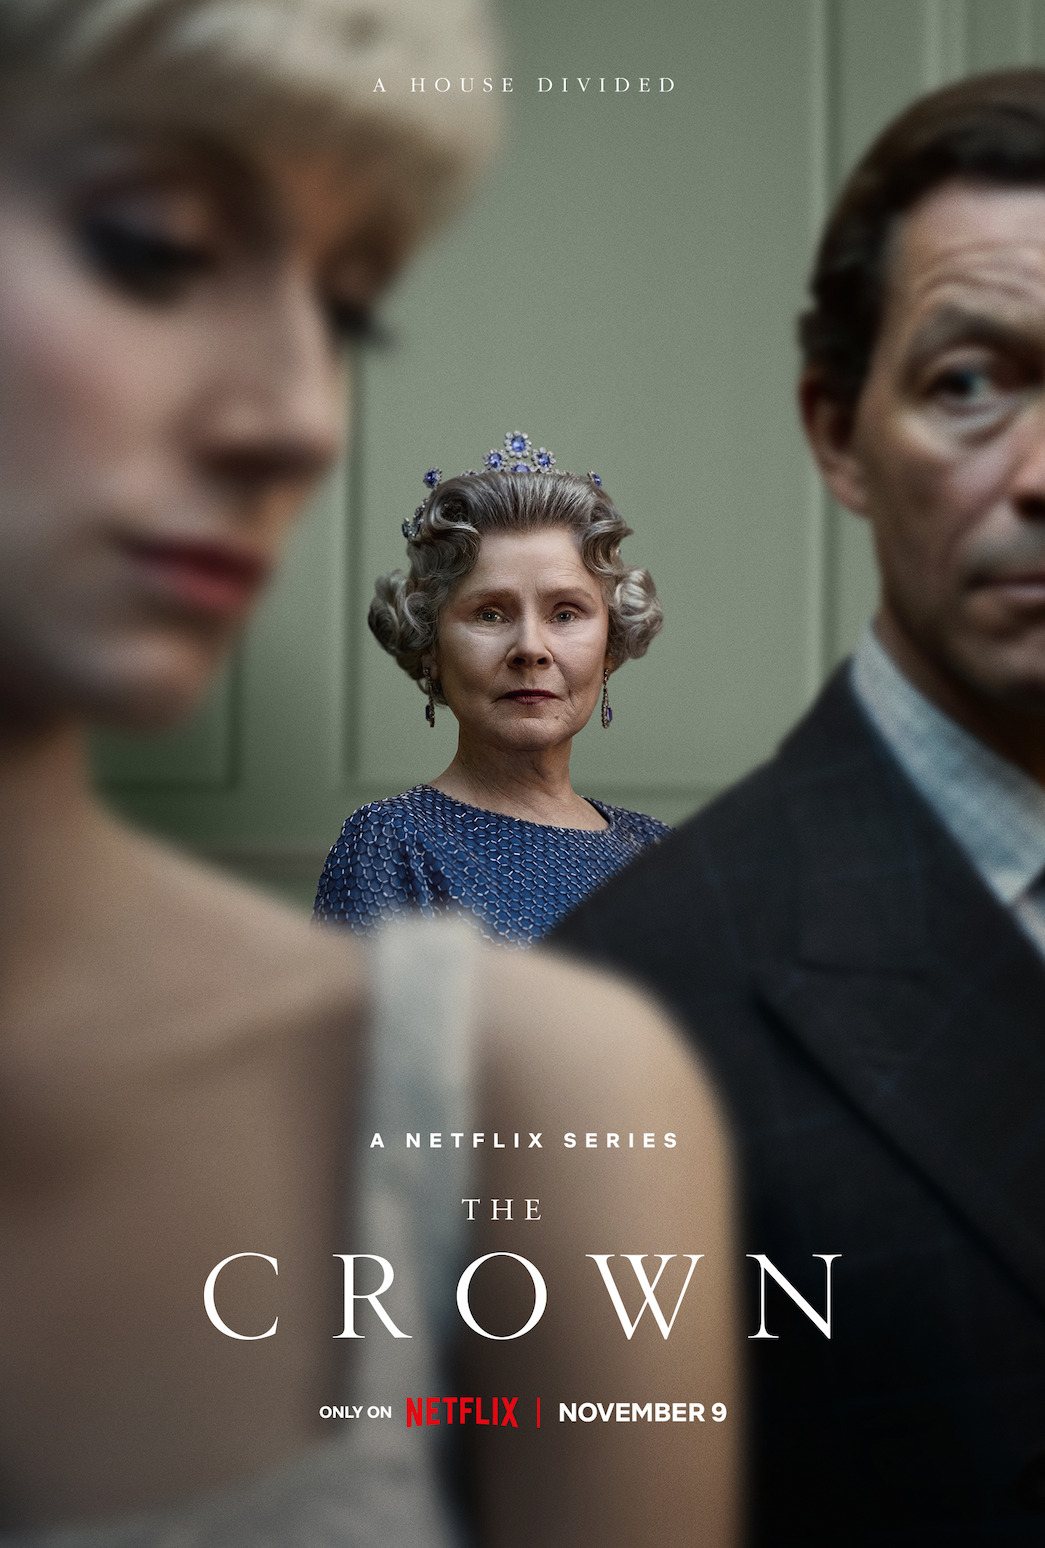 The Crown Season 5: Get a first look at the intriguing new trailer where Diana and Charles wage a media war